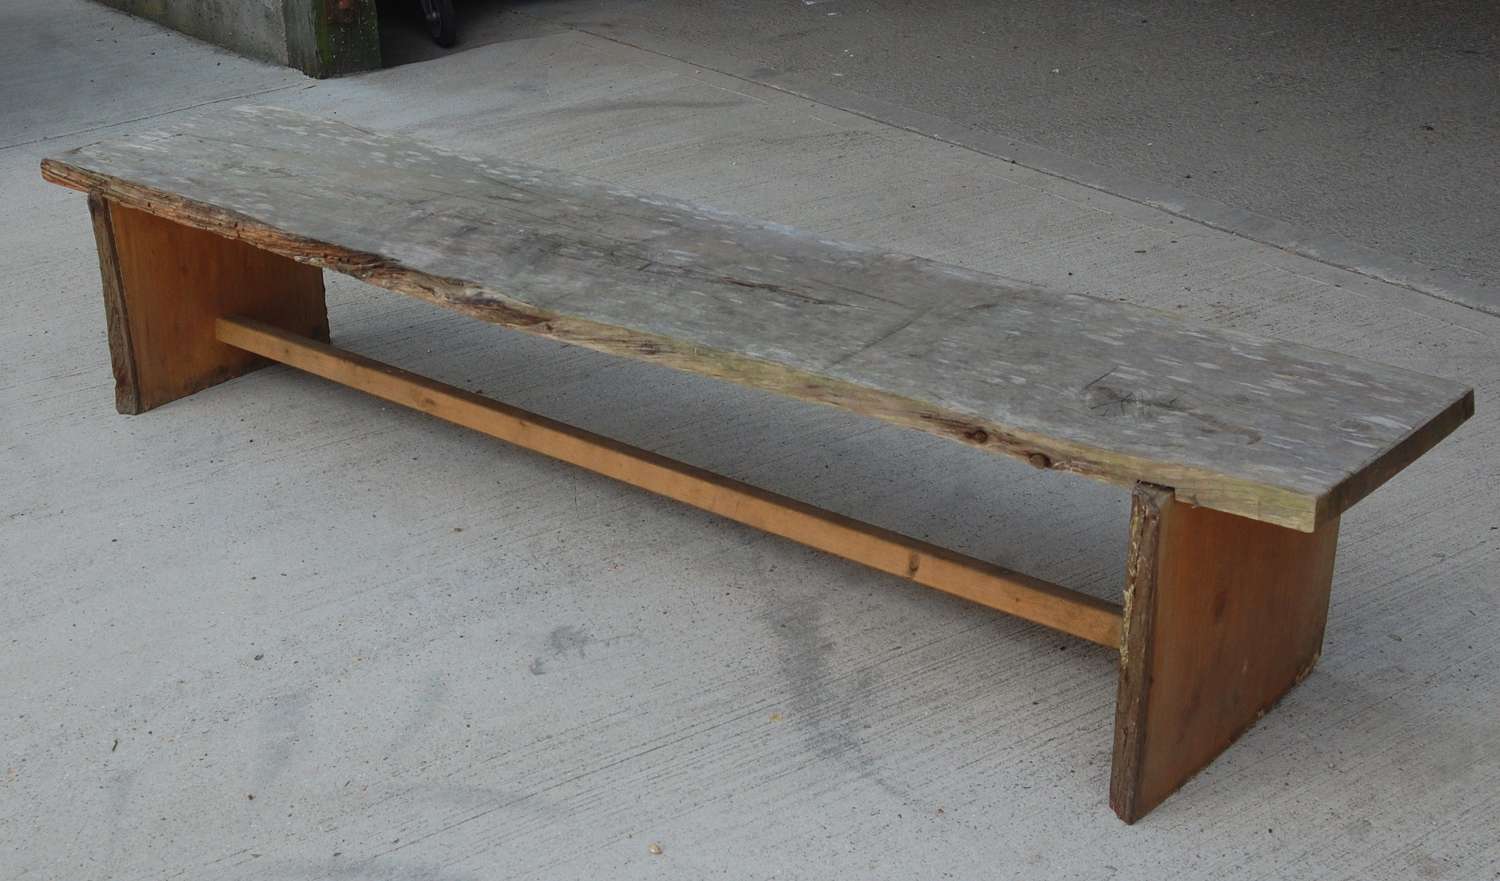 M1544 A RUSTIC RECLAIMED HARDWOOD BENCH 2-3 SEATER